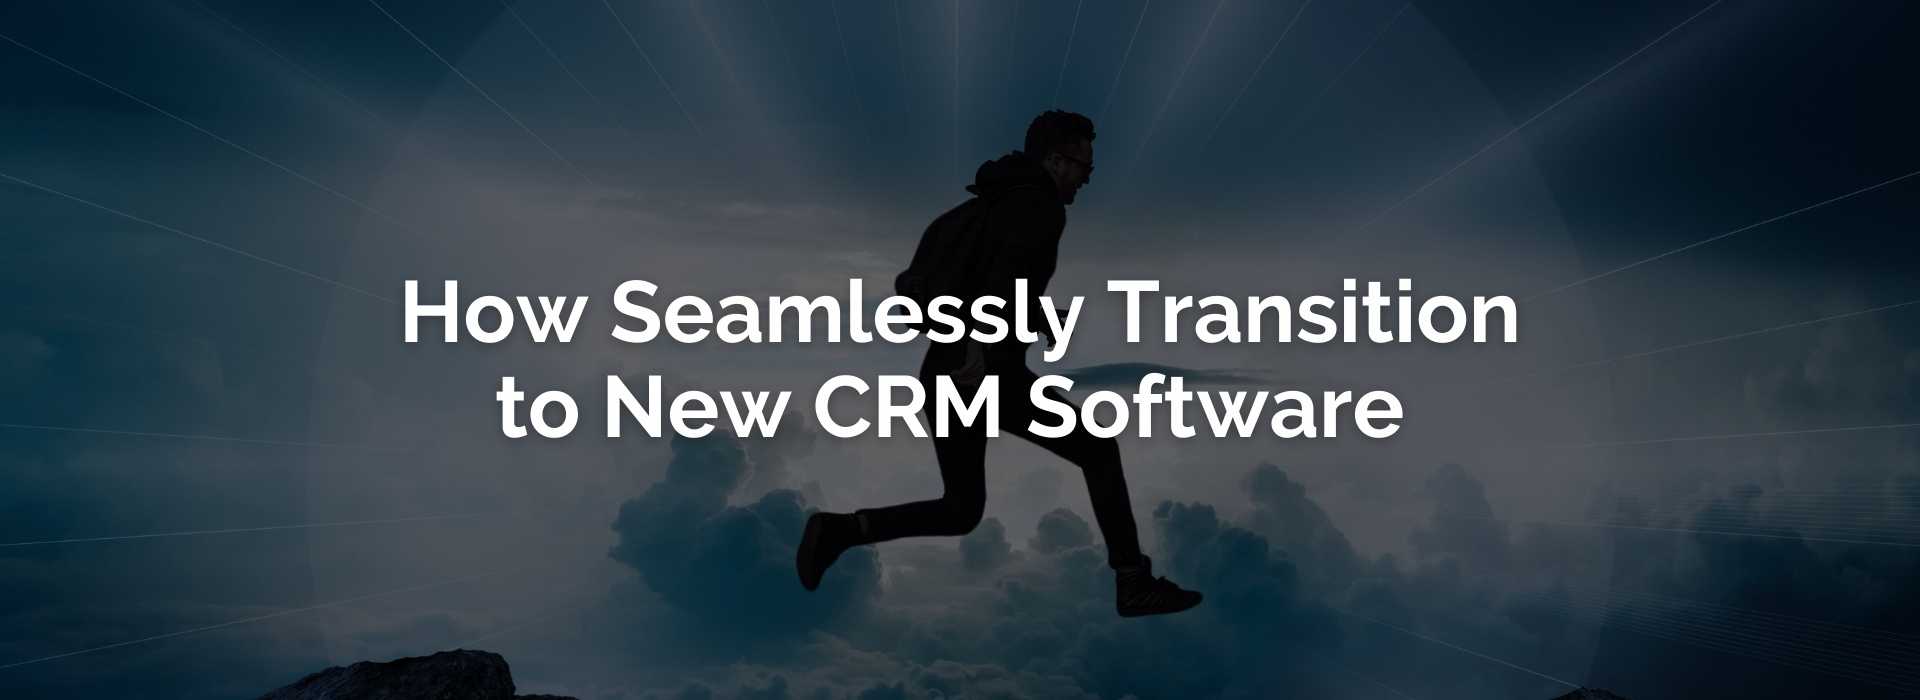 HOW TO SEAMLESSLY TRANSITION TO A NEW CRM SOFTWARE SOLUTION